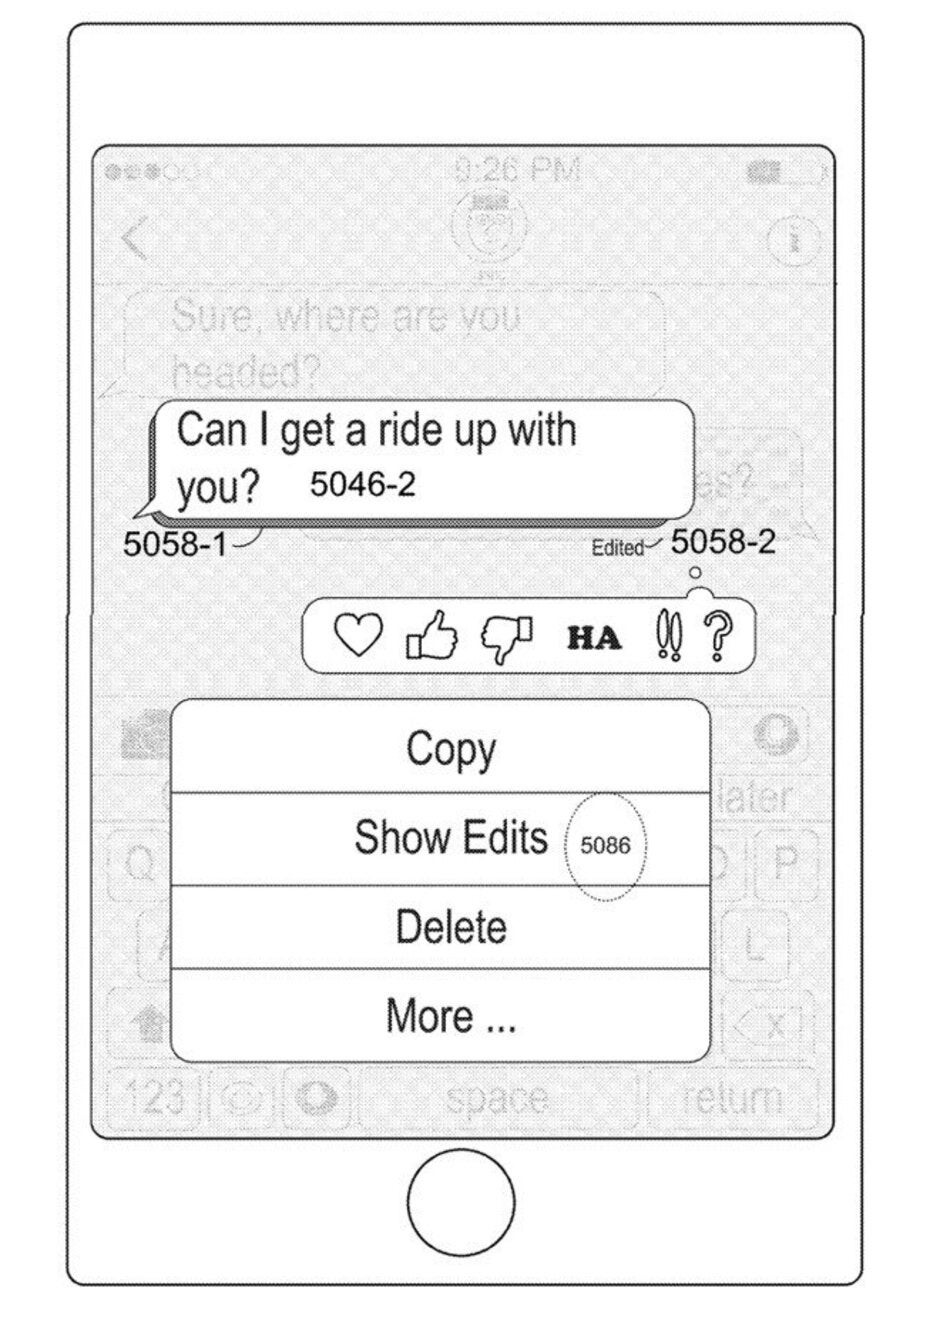 An image from the patent application showing the edit functionality - iPhone users will apparently be able to edit sent messages in the future